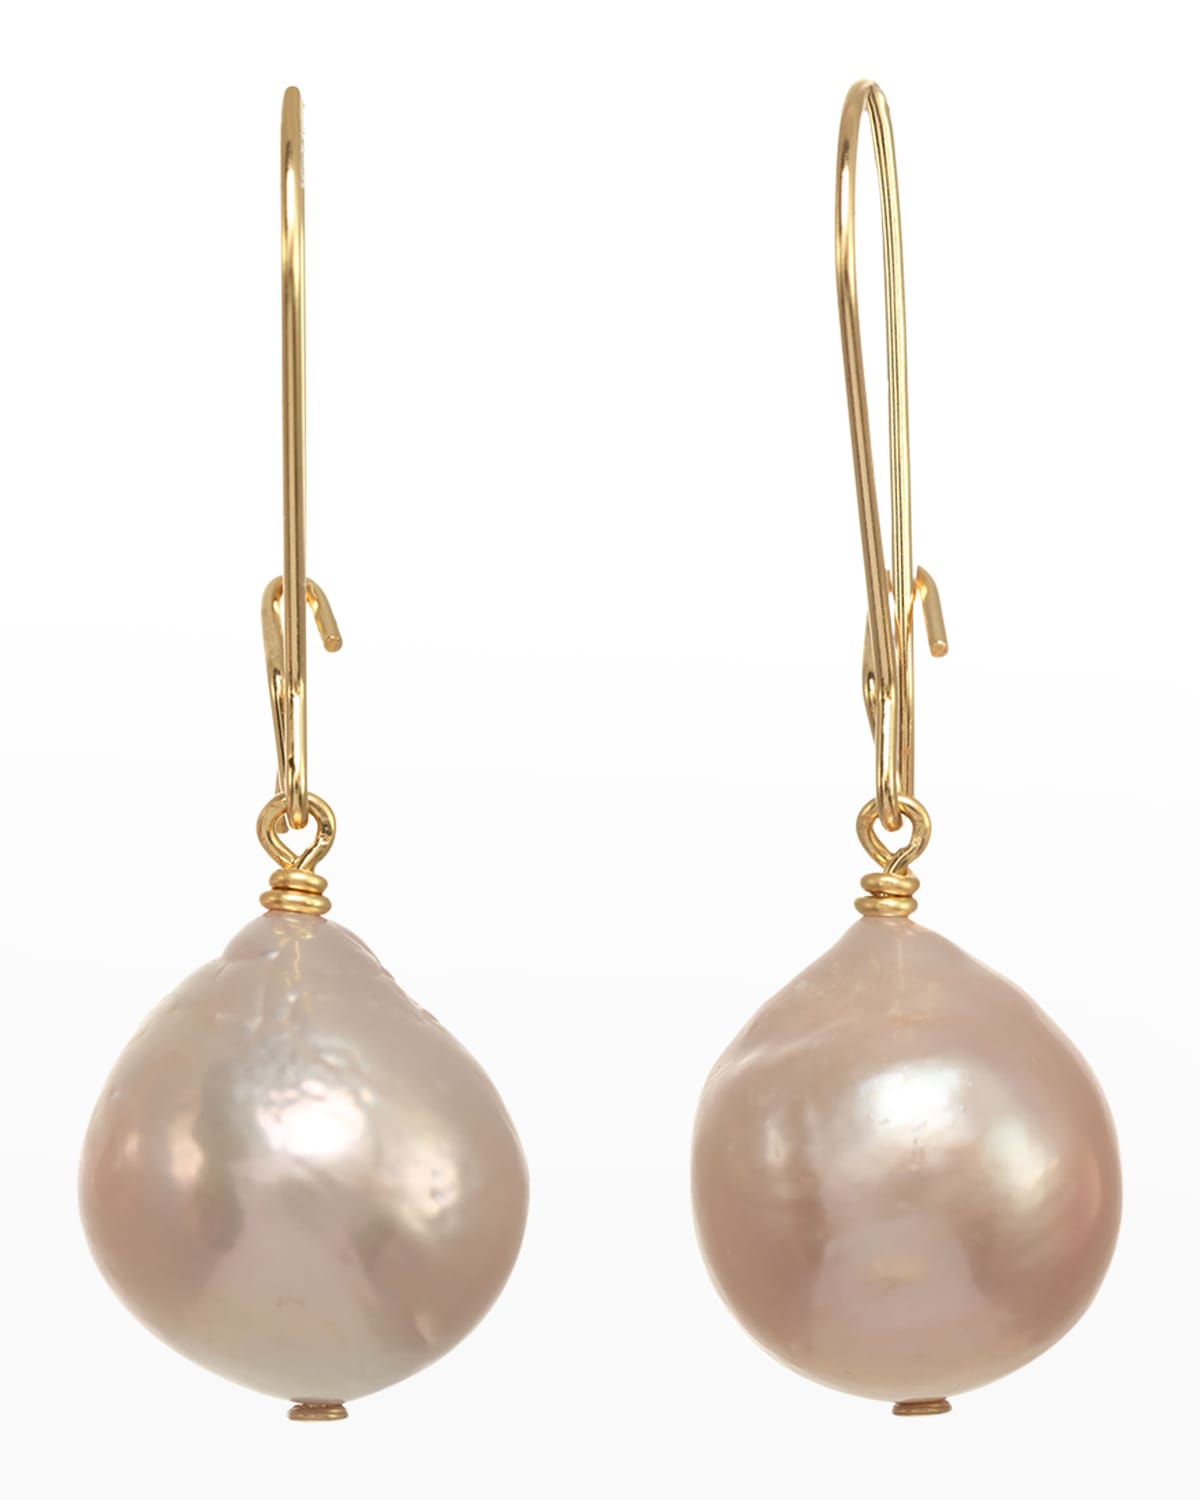 Margo Morrison Baroque Pearl Earrings with 14k Gold Fill